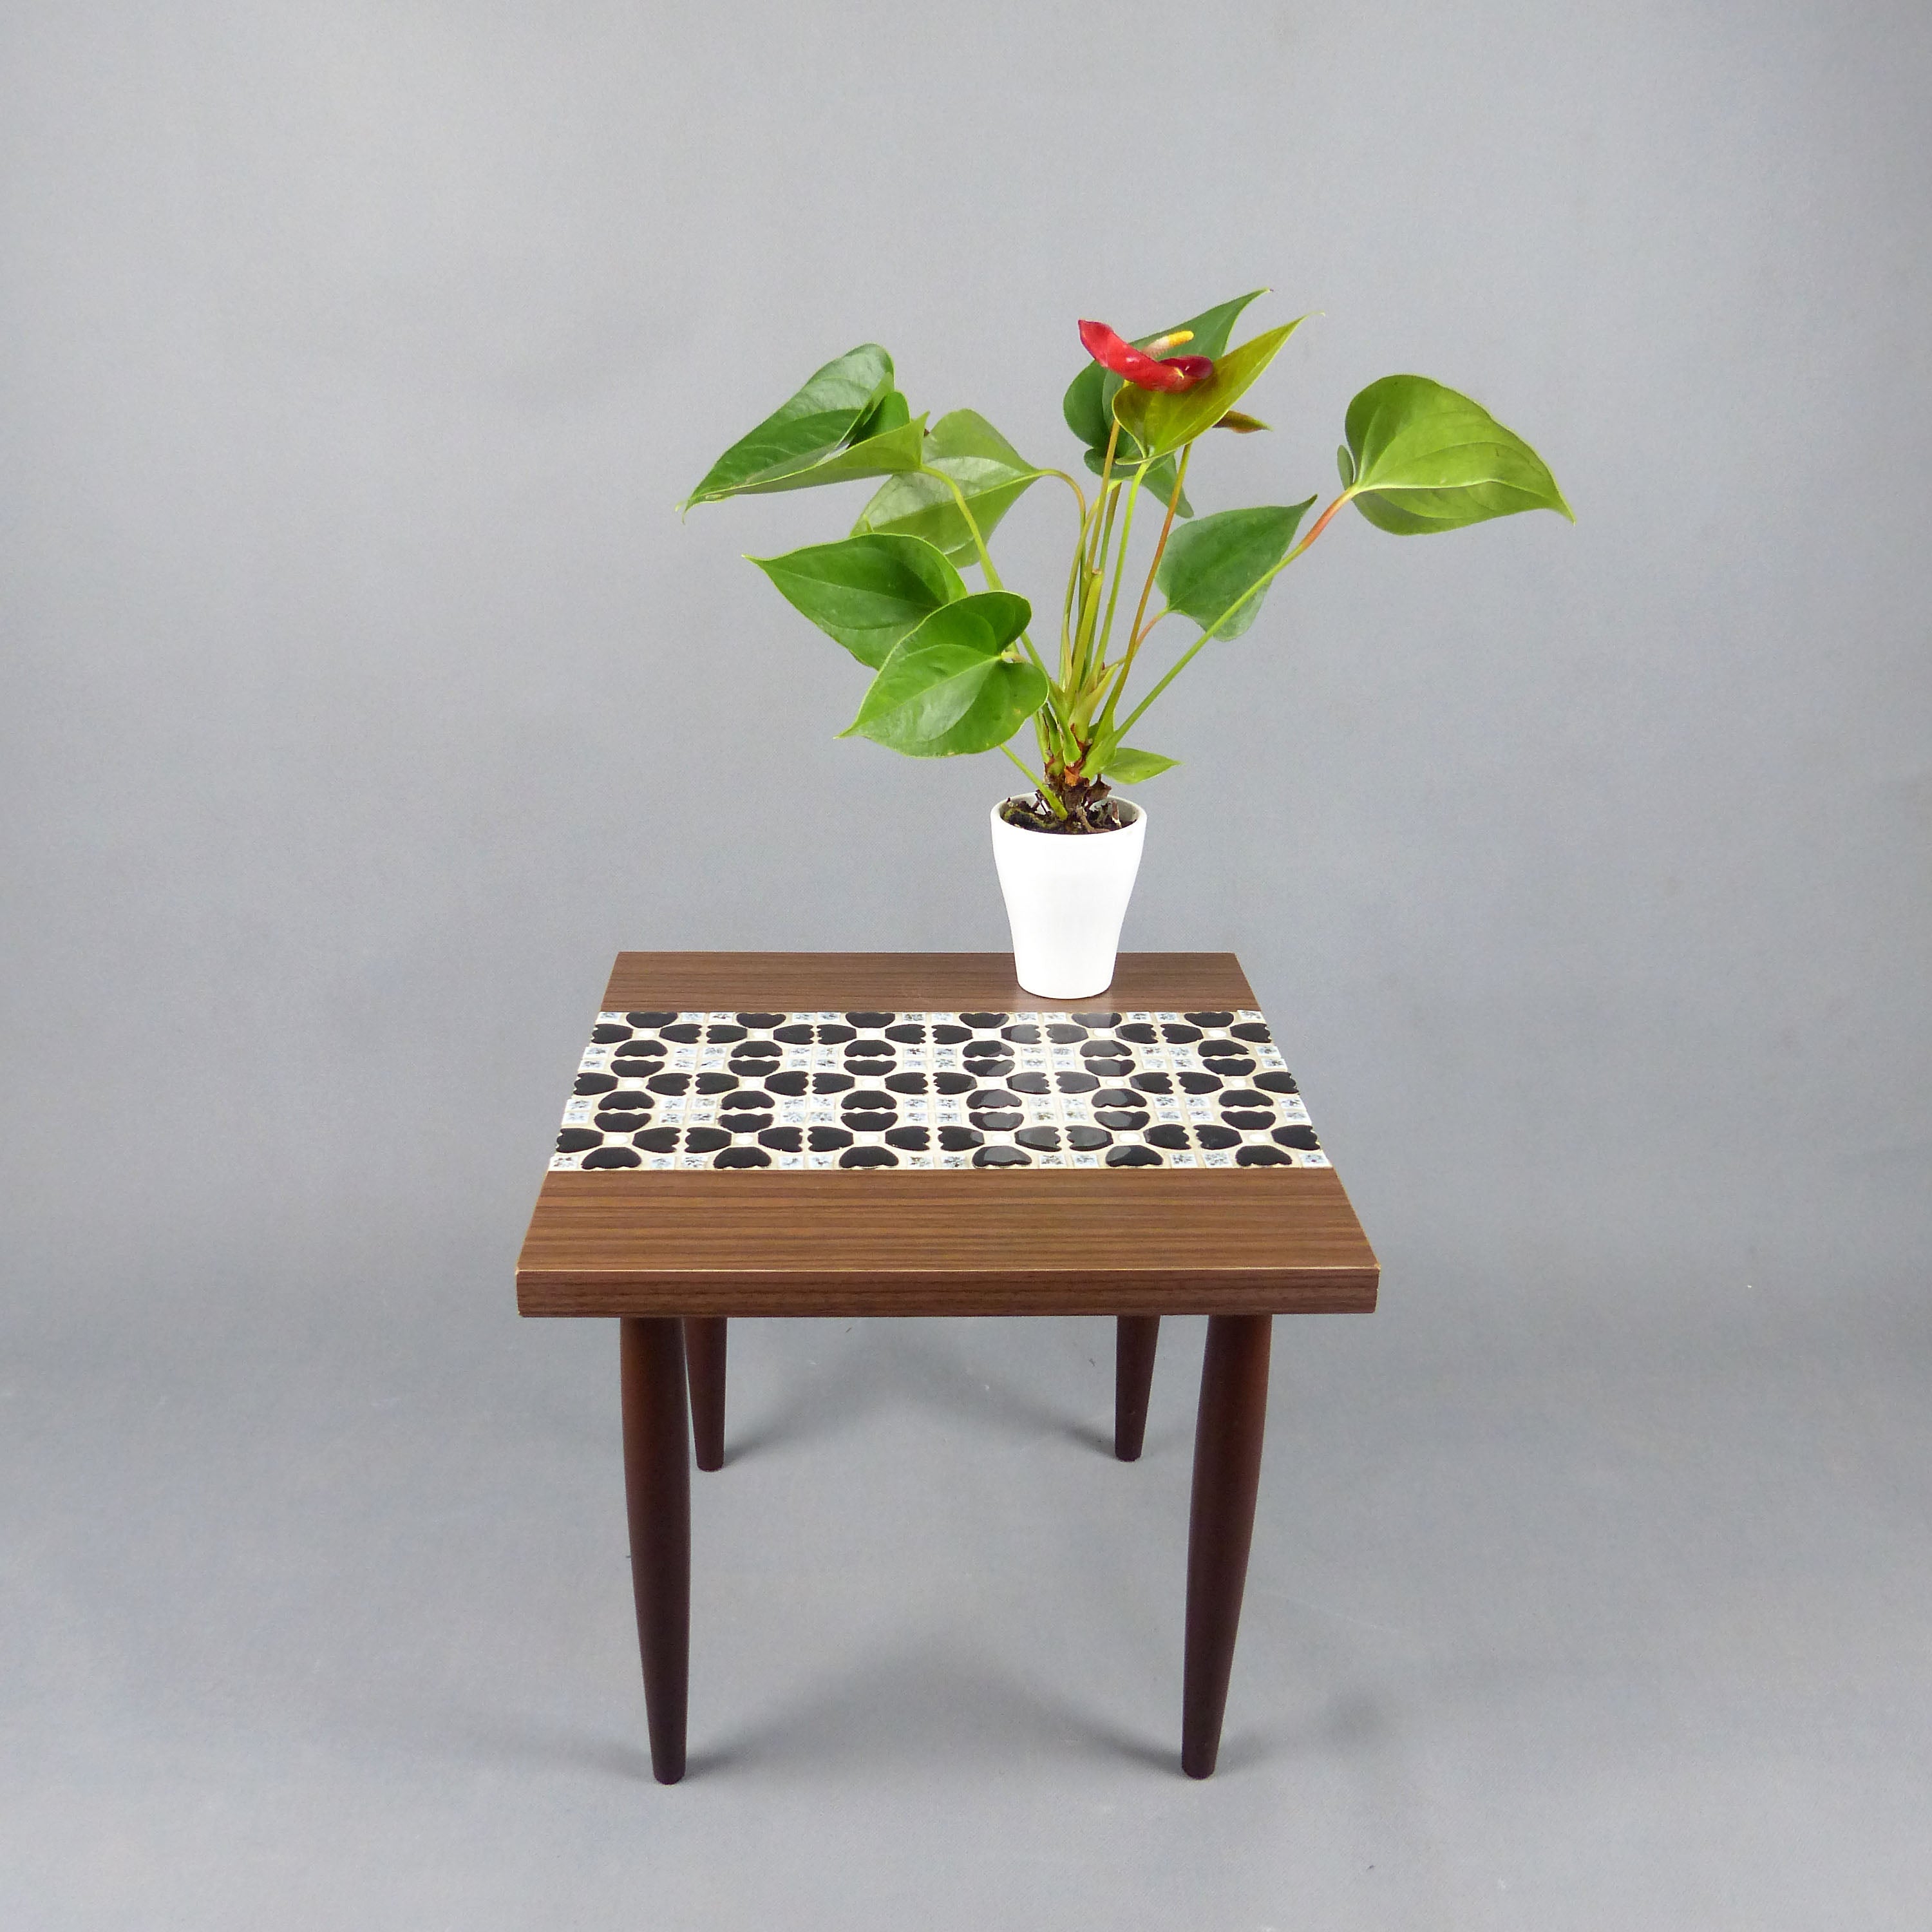 1960s wooden BICOLOR SEWING BOX on tapered legs, vintage folding